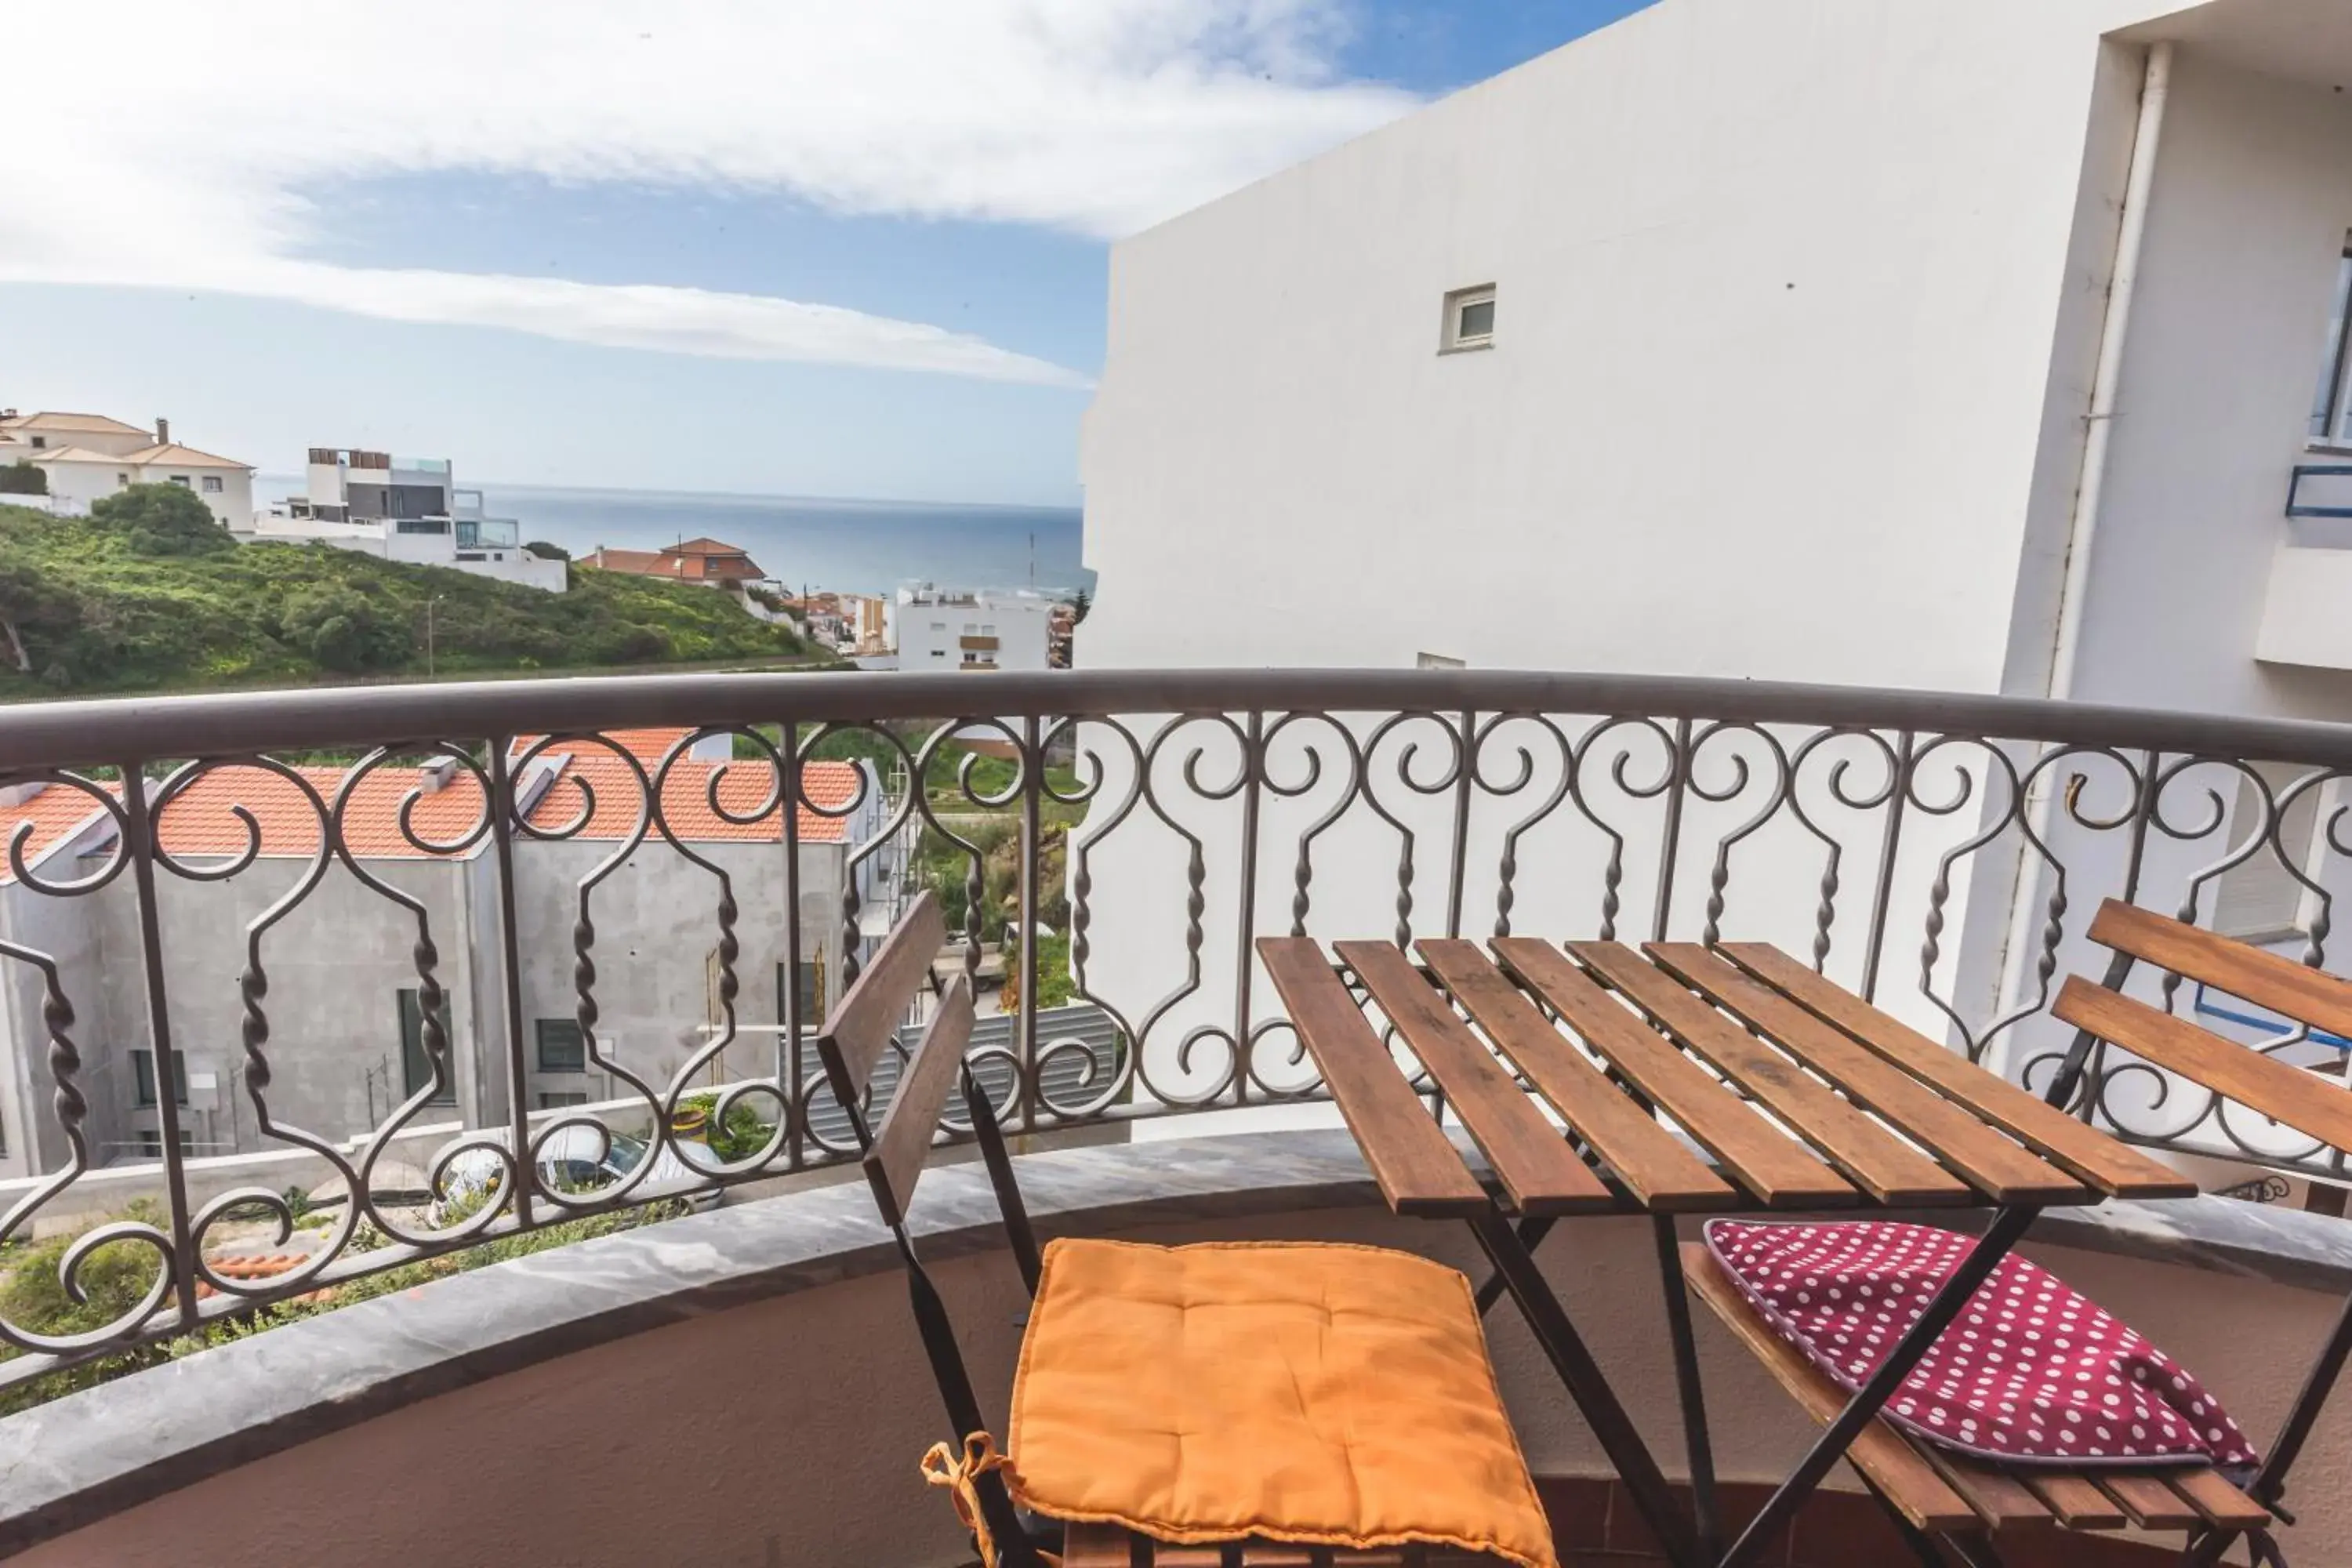 Balcony/Terrace in Ericeira Chill Hill Hostel & Private Rooms - Peach Garden